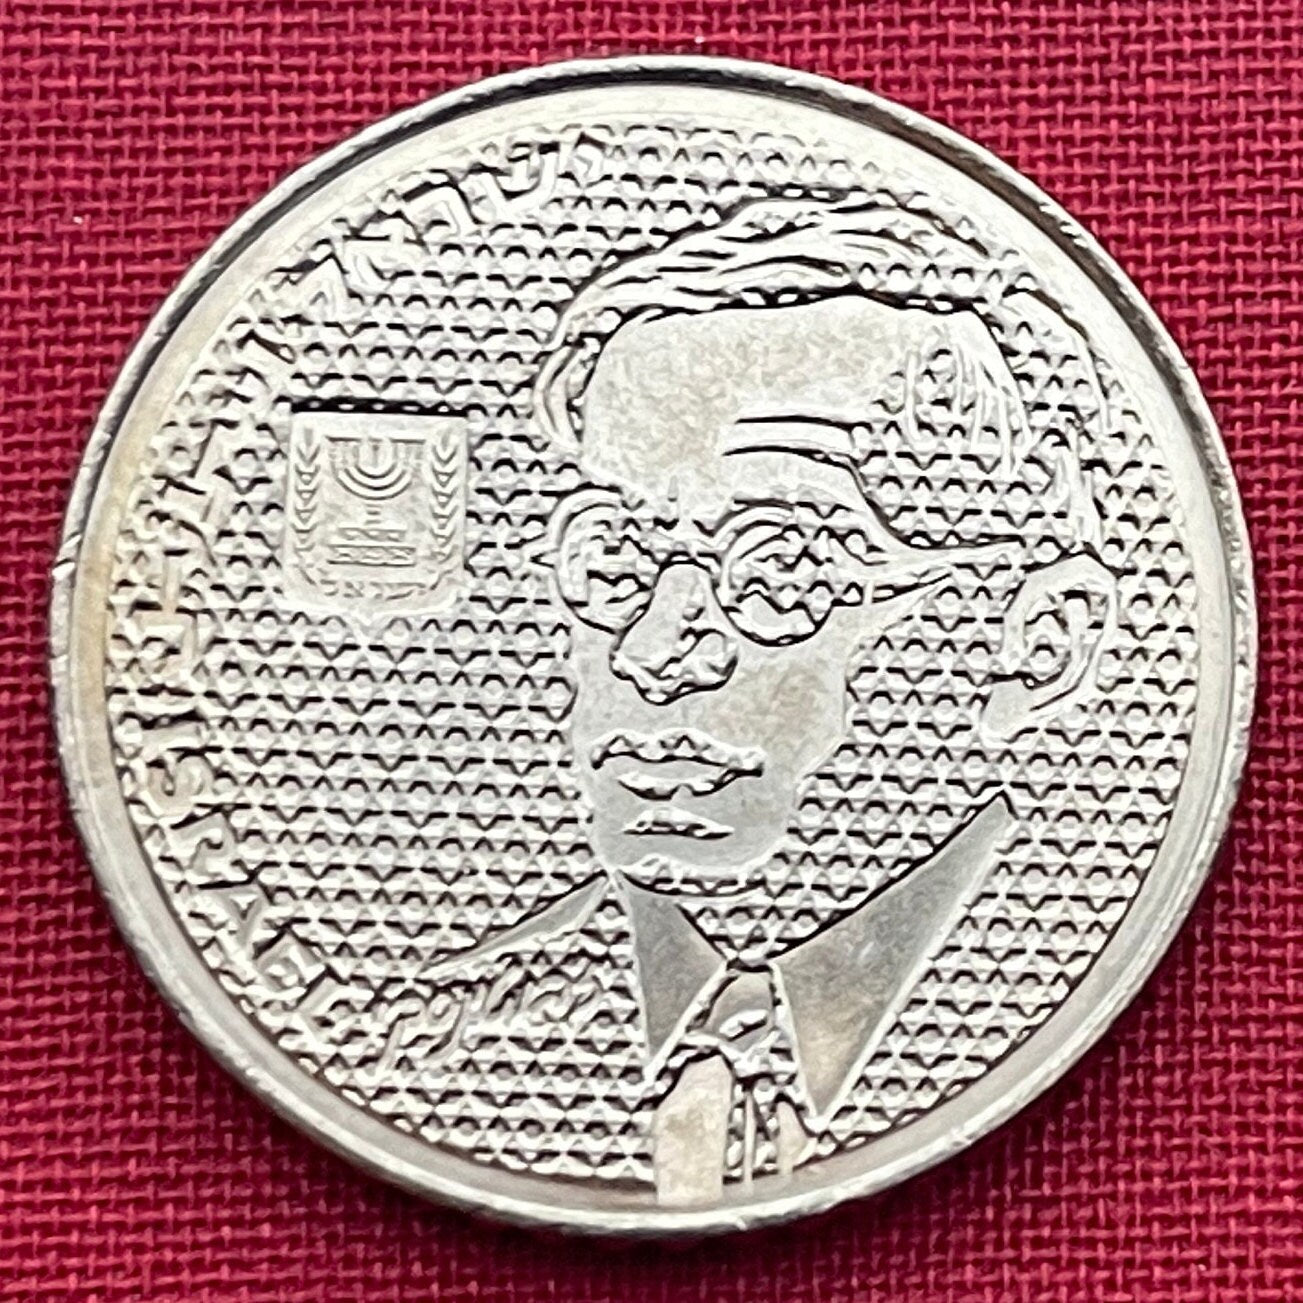 Ze'ev Jabotinsky 100 Shequalim Israel Authentic Coin Money for Jewelry and Craft Making (Zionism) (Likud) (1985)